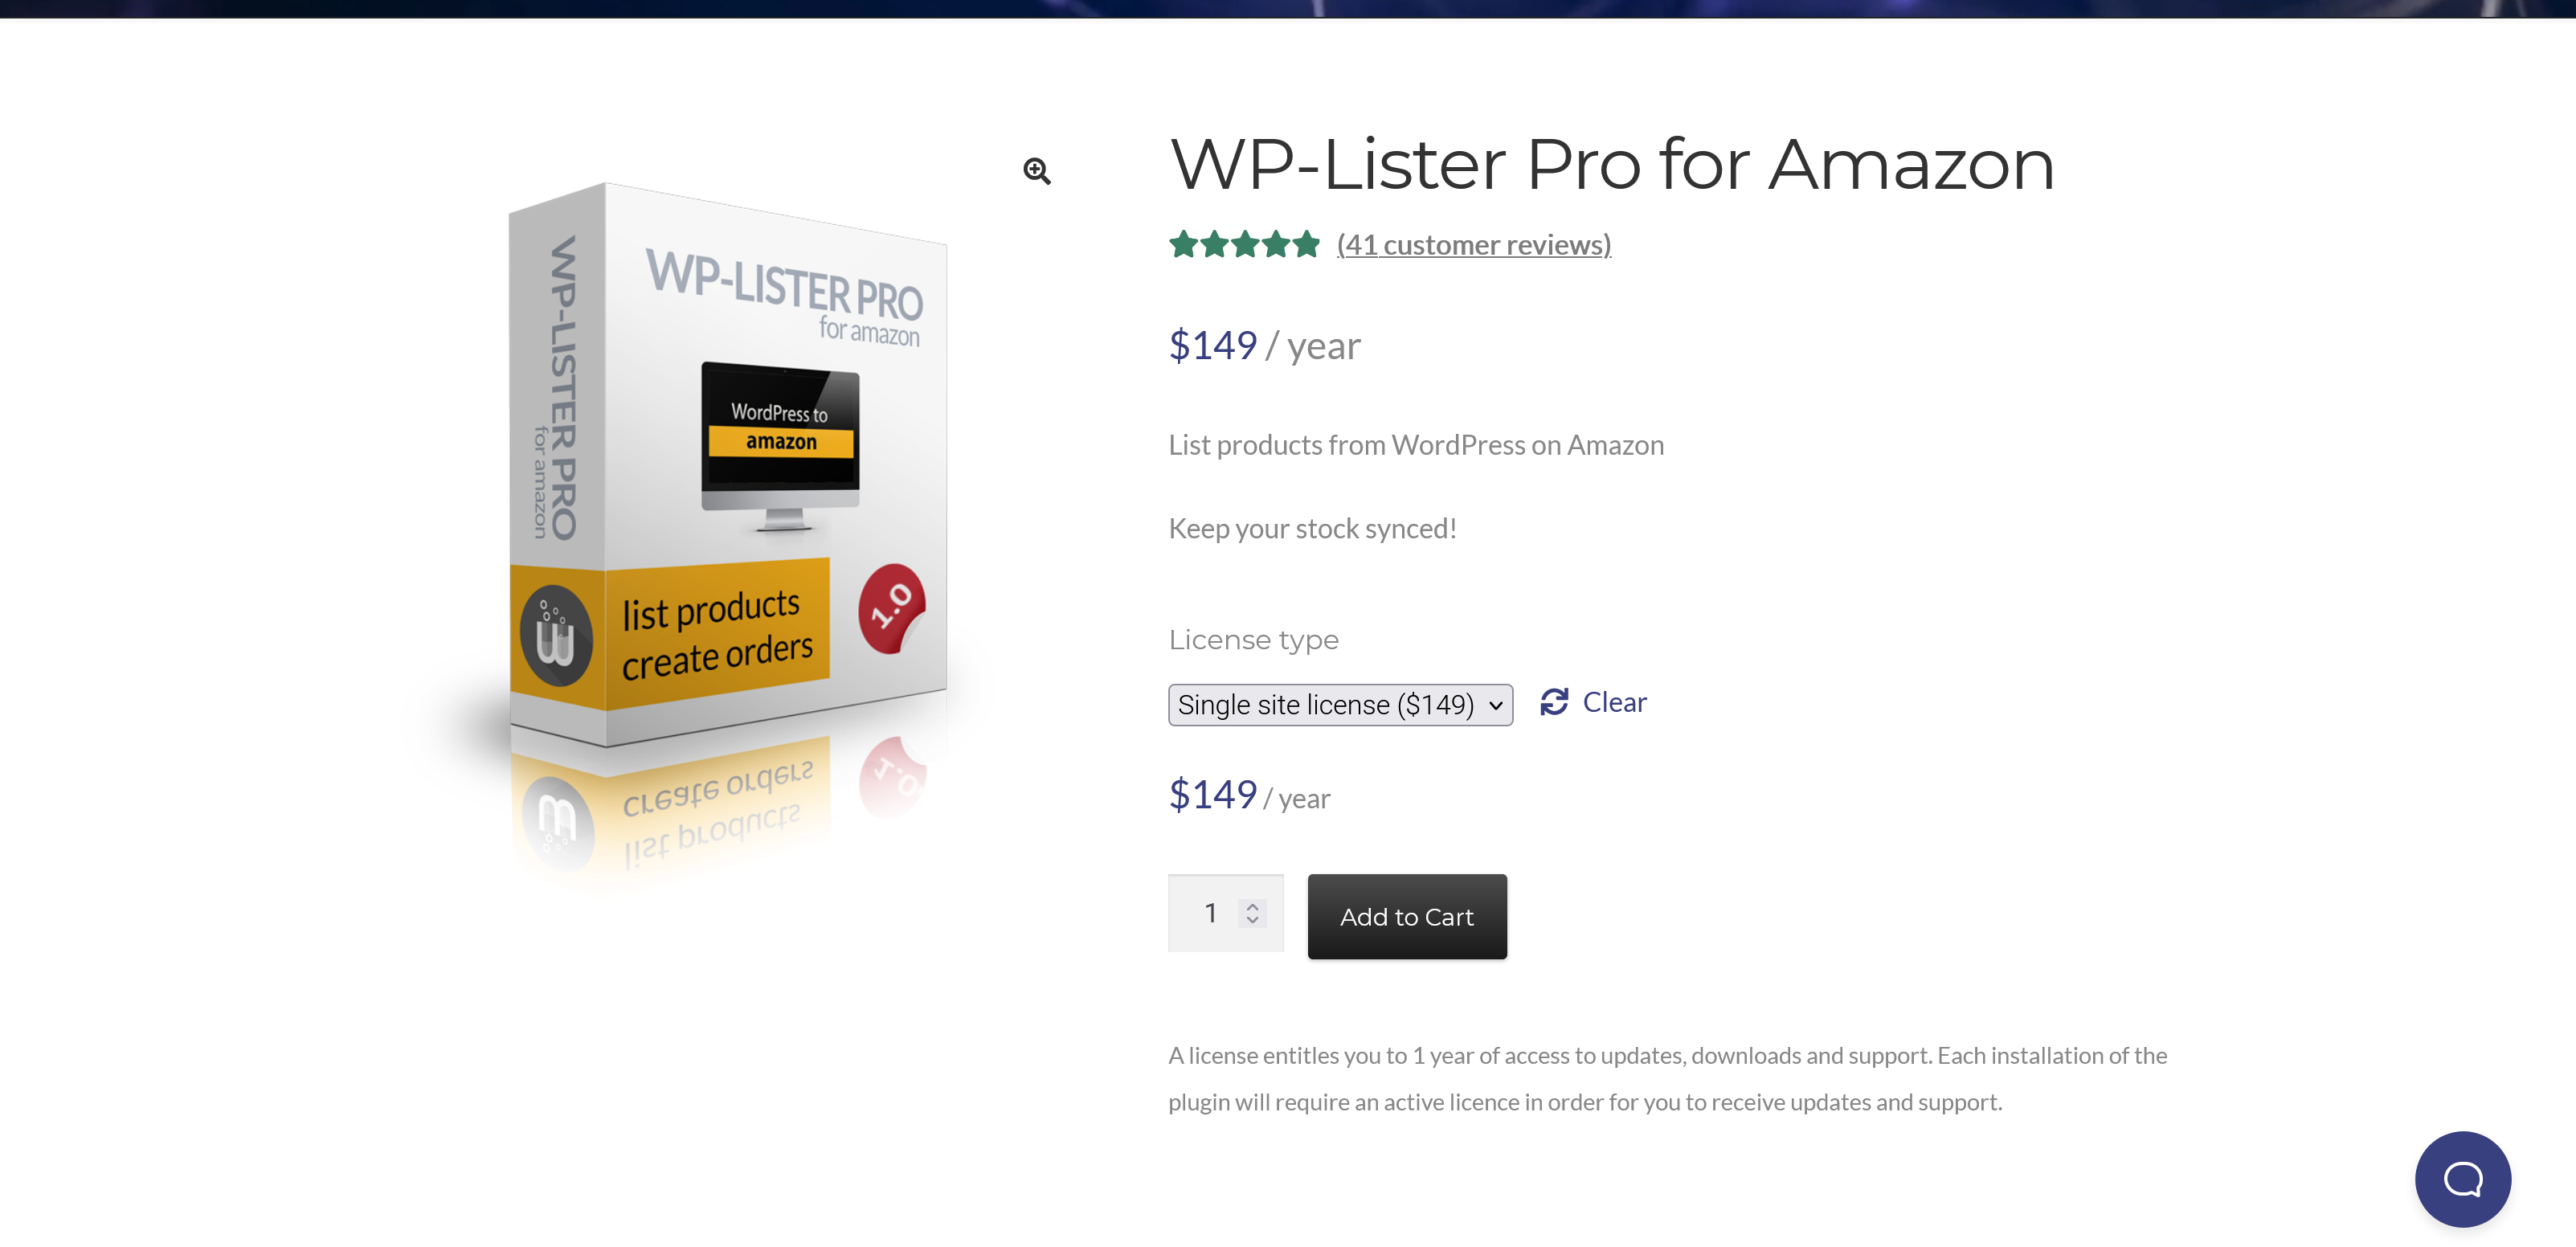 WP-Lister Pro for Amazon 2.0.7 – List products on Amazon